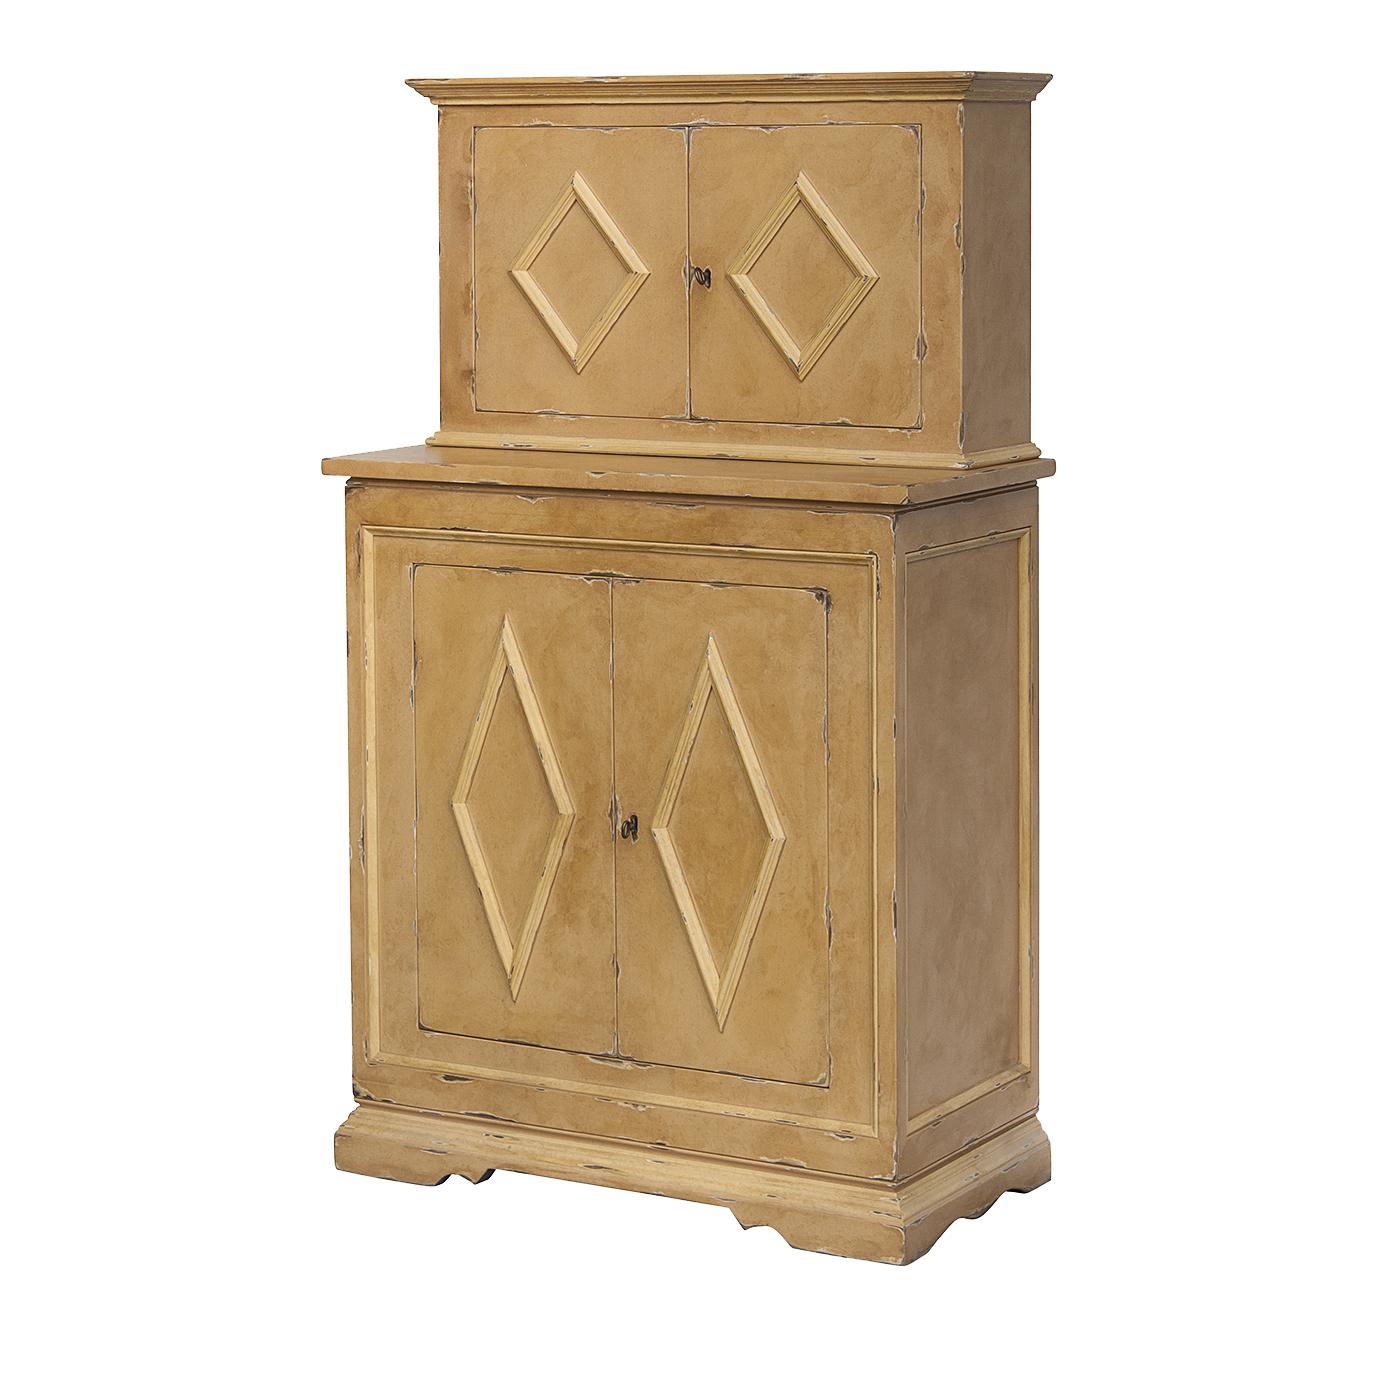 This exquisite cupboard was crated of solid wood and boasts a harmonious silhouette and sober decorations, reminiscent of the classical-inspired Renaissance style. The wood has a multicolored finish with antique orange hues and shows charming signs